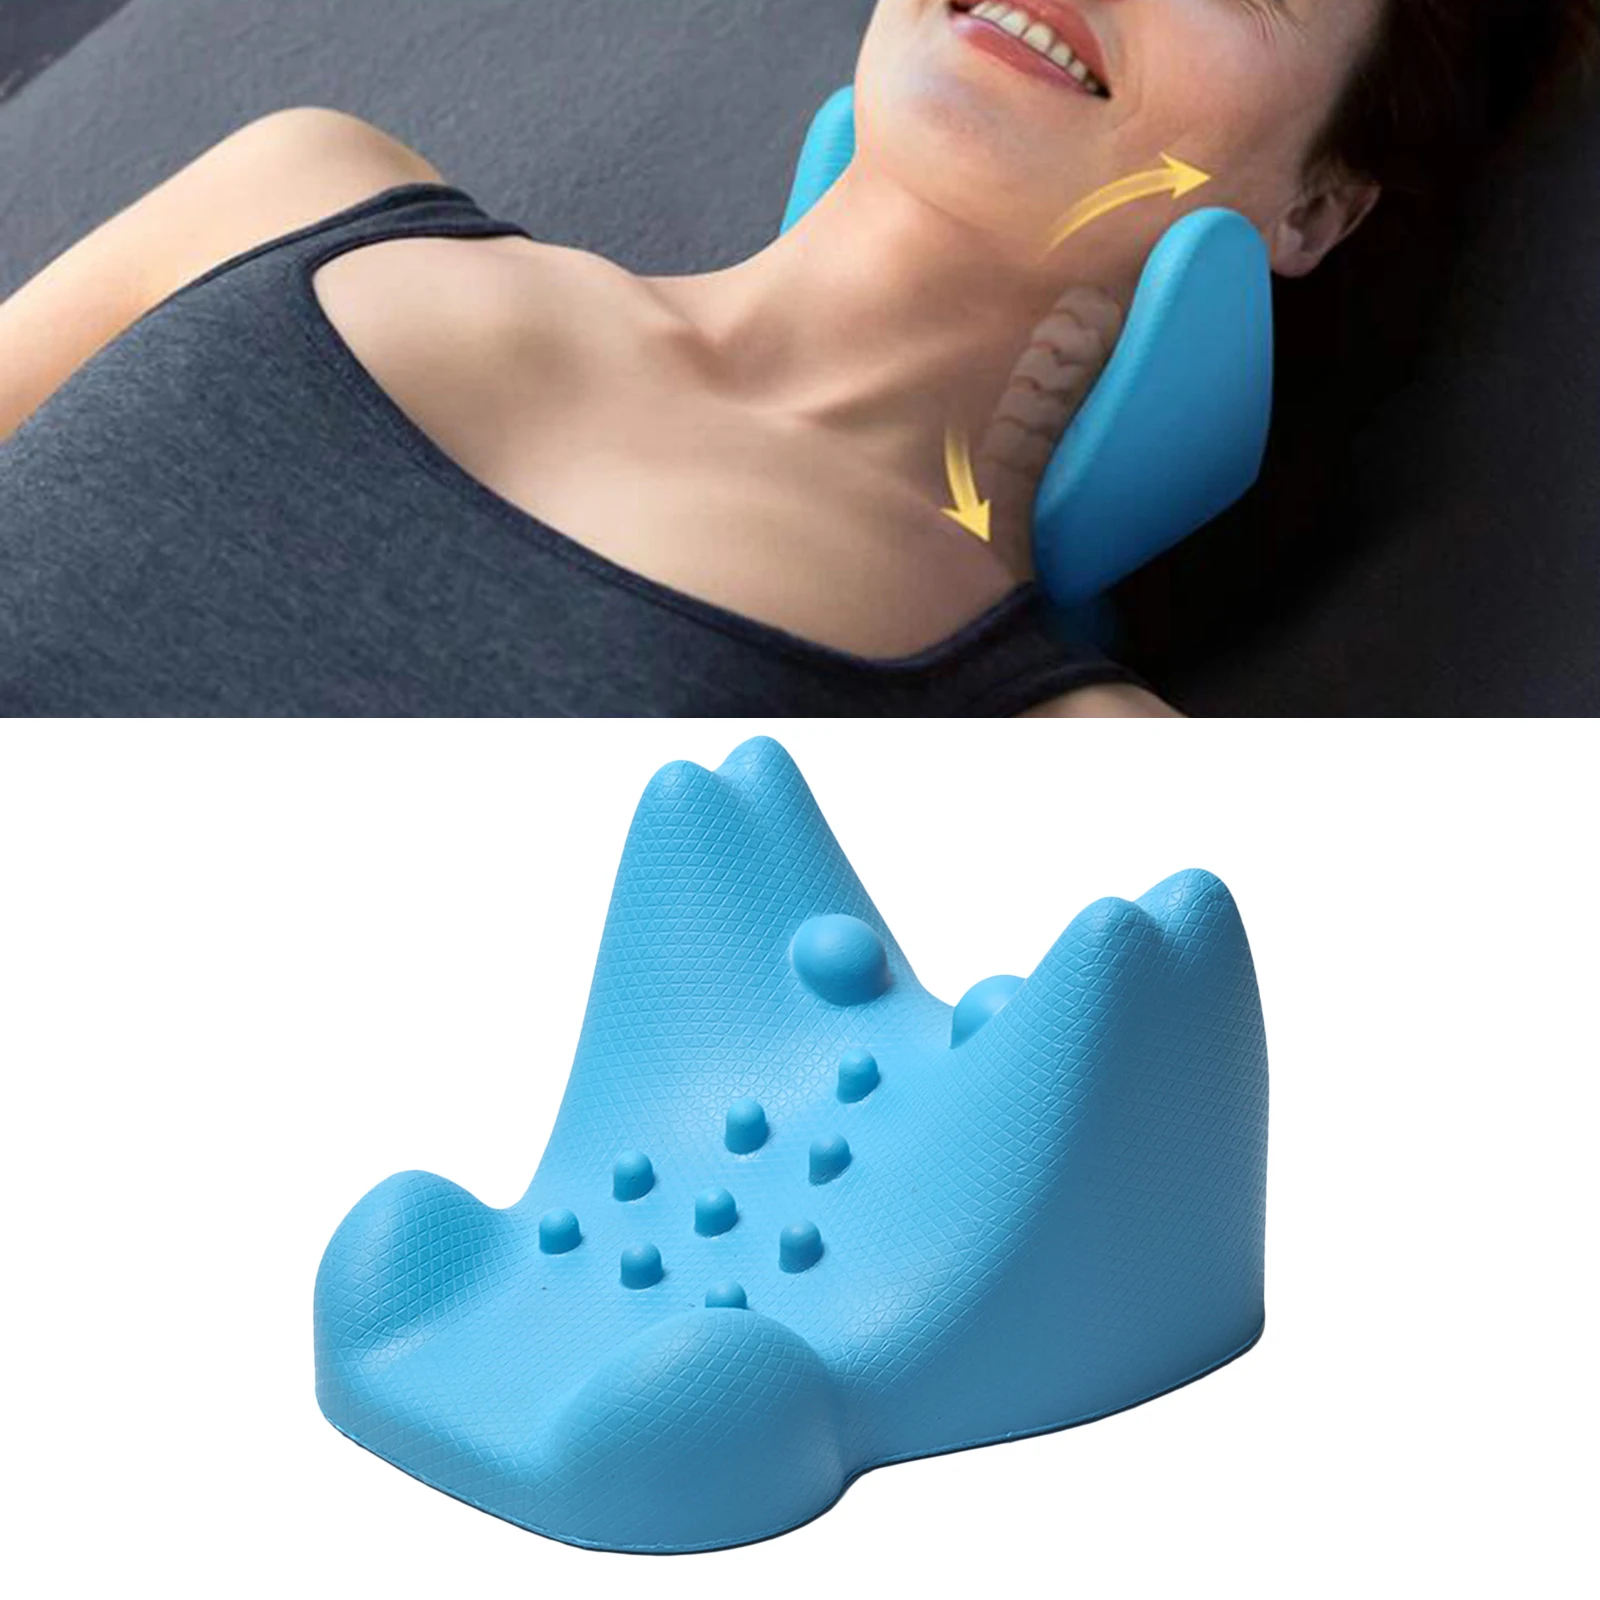 Portable Neck Shoulder Relaxer for Muscle Relax Simple Effective Lightweight Pillow Neck Pain Headache Hammock Traction Rest